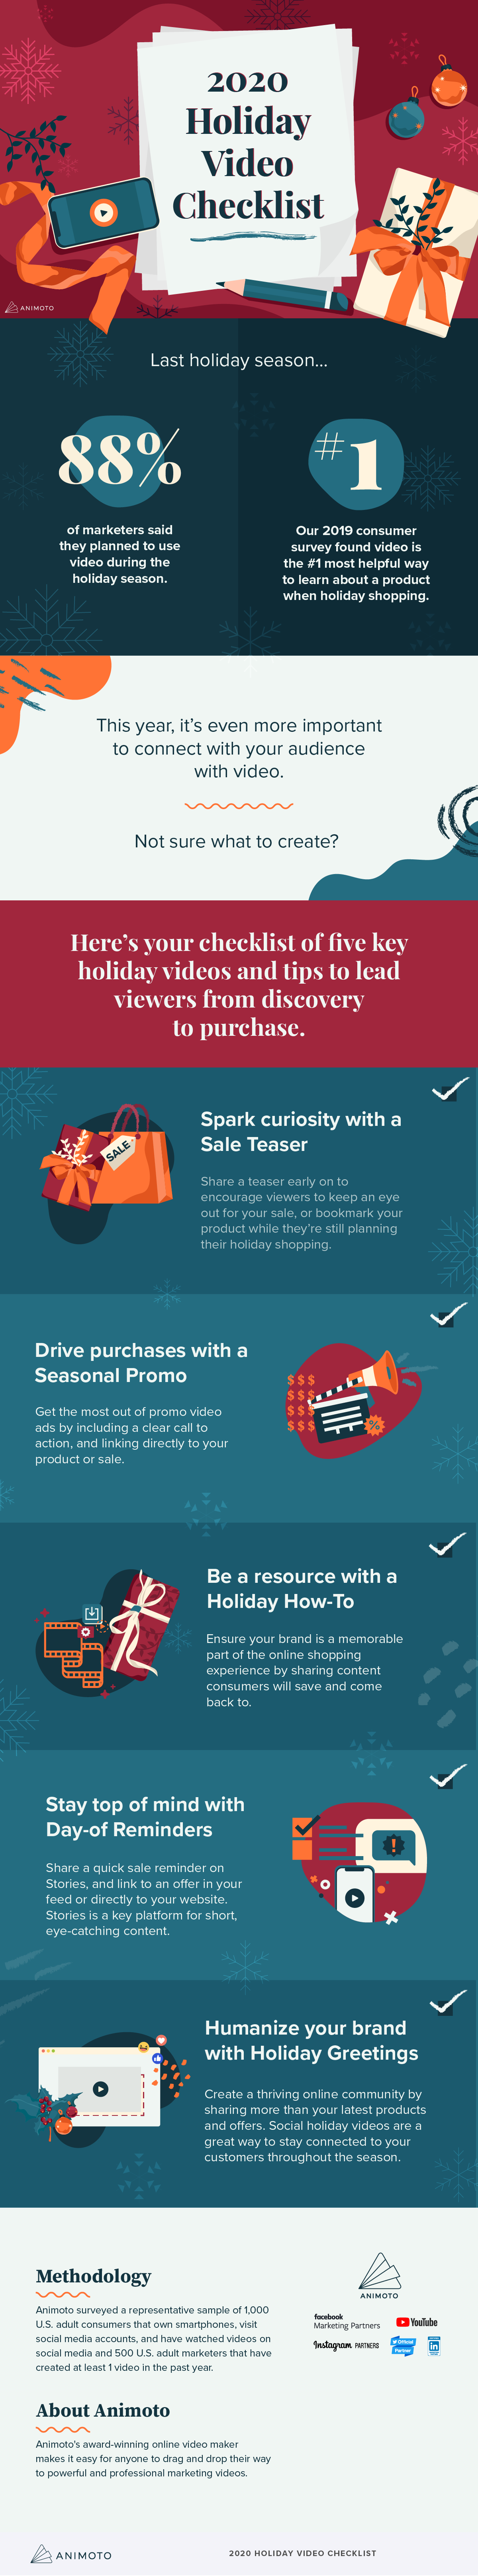 Infographic with ways to use vdeo content in holiday campaigns.